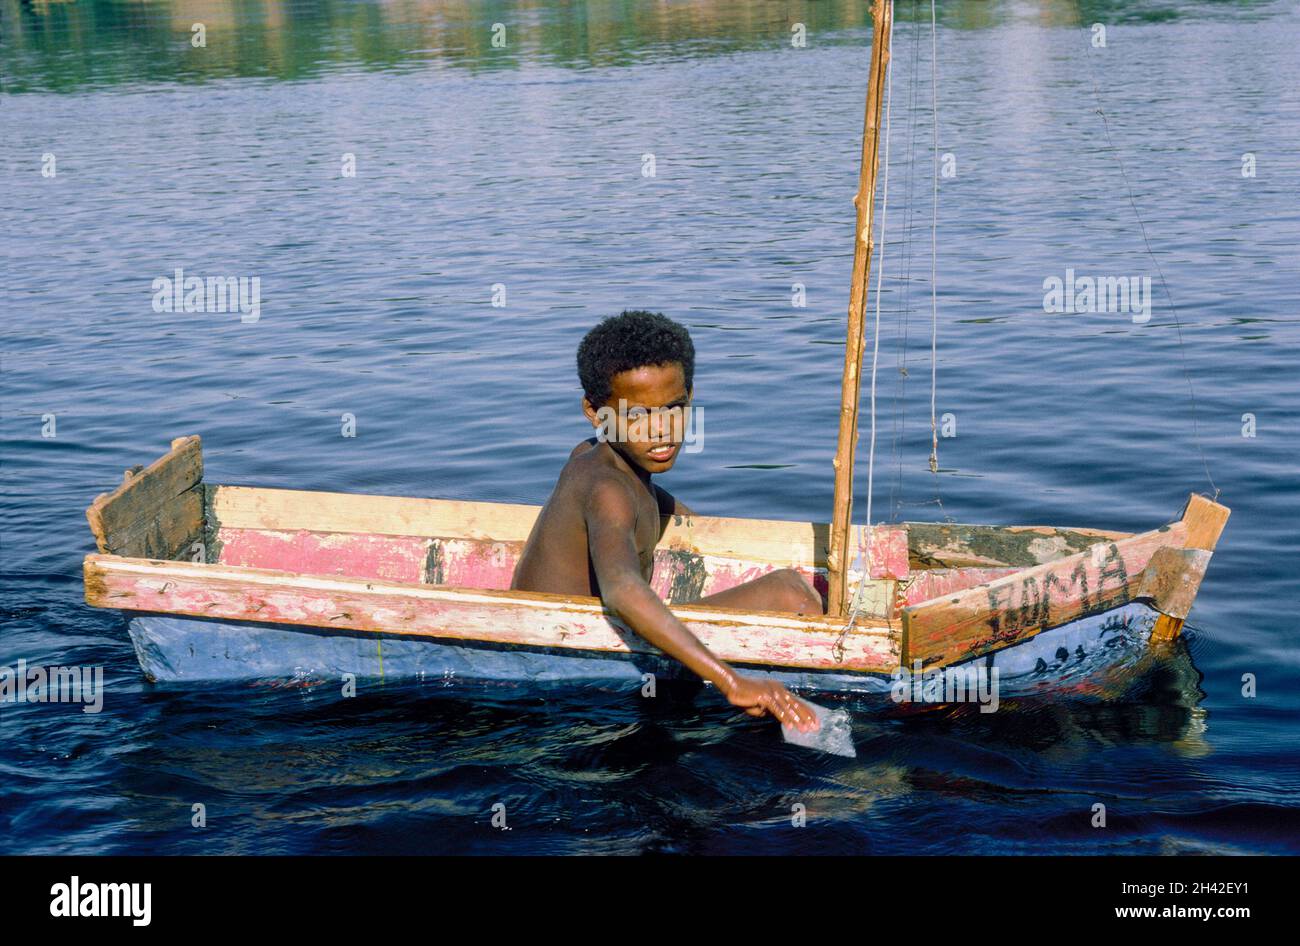 Africa, Egypt, Aswan, River Nile 1976. A boy in a homemade boat with an eye painted on the prow. The 'all-seeing eye'.  The Eye of Horus was a symbol of protection, health, and wholeness. Stock Photo